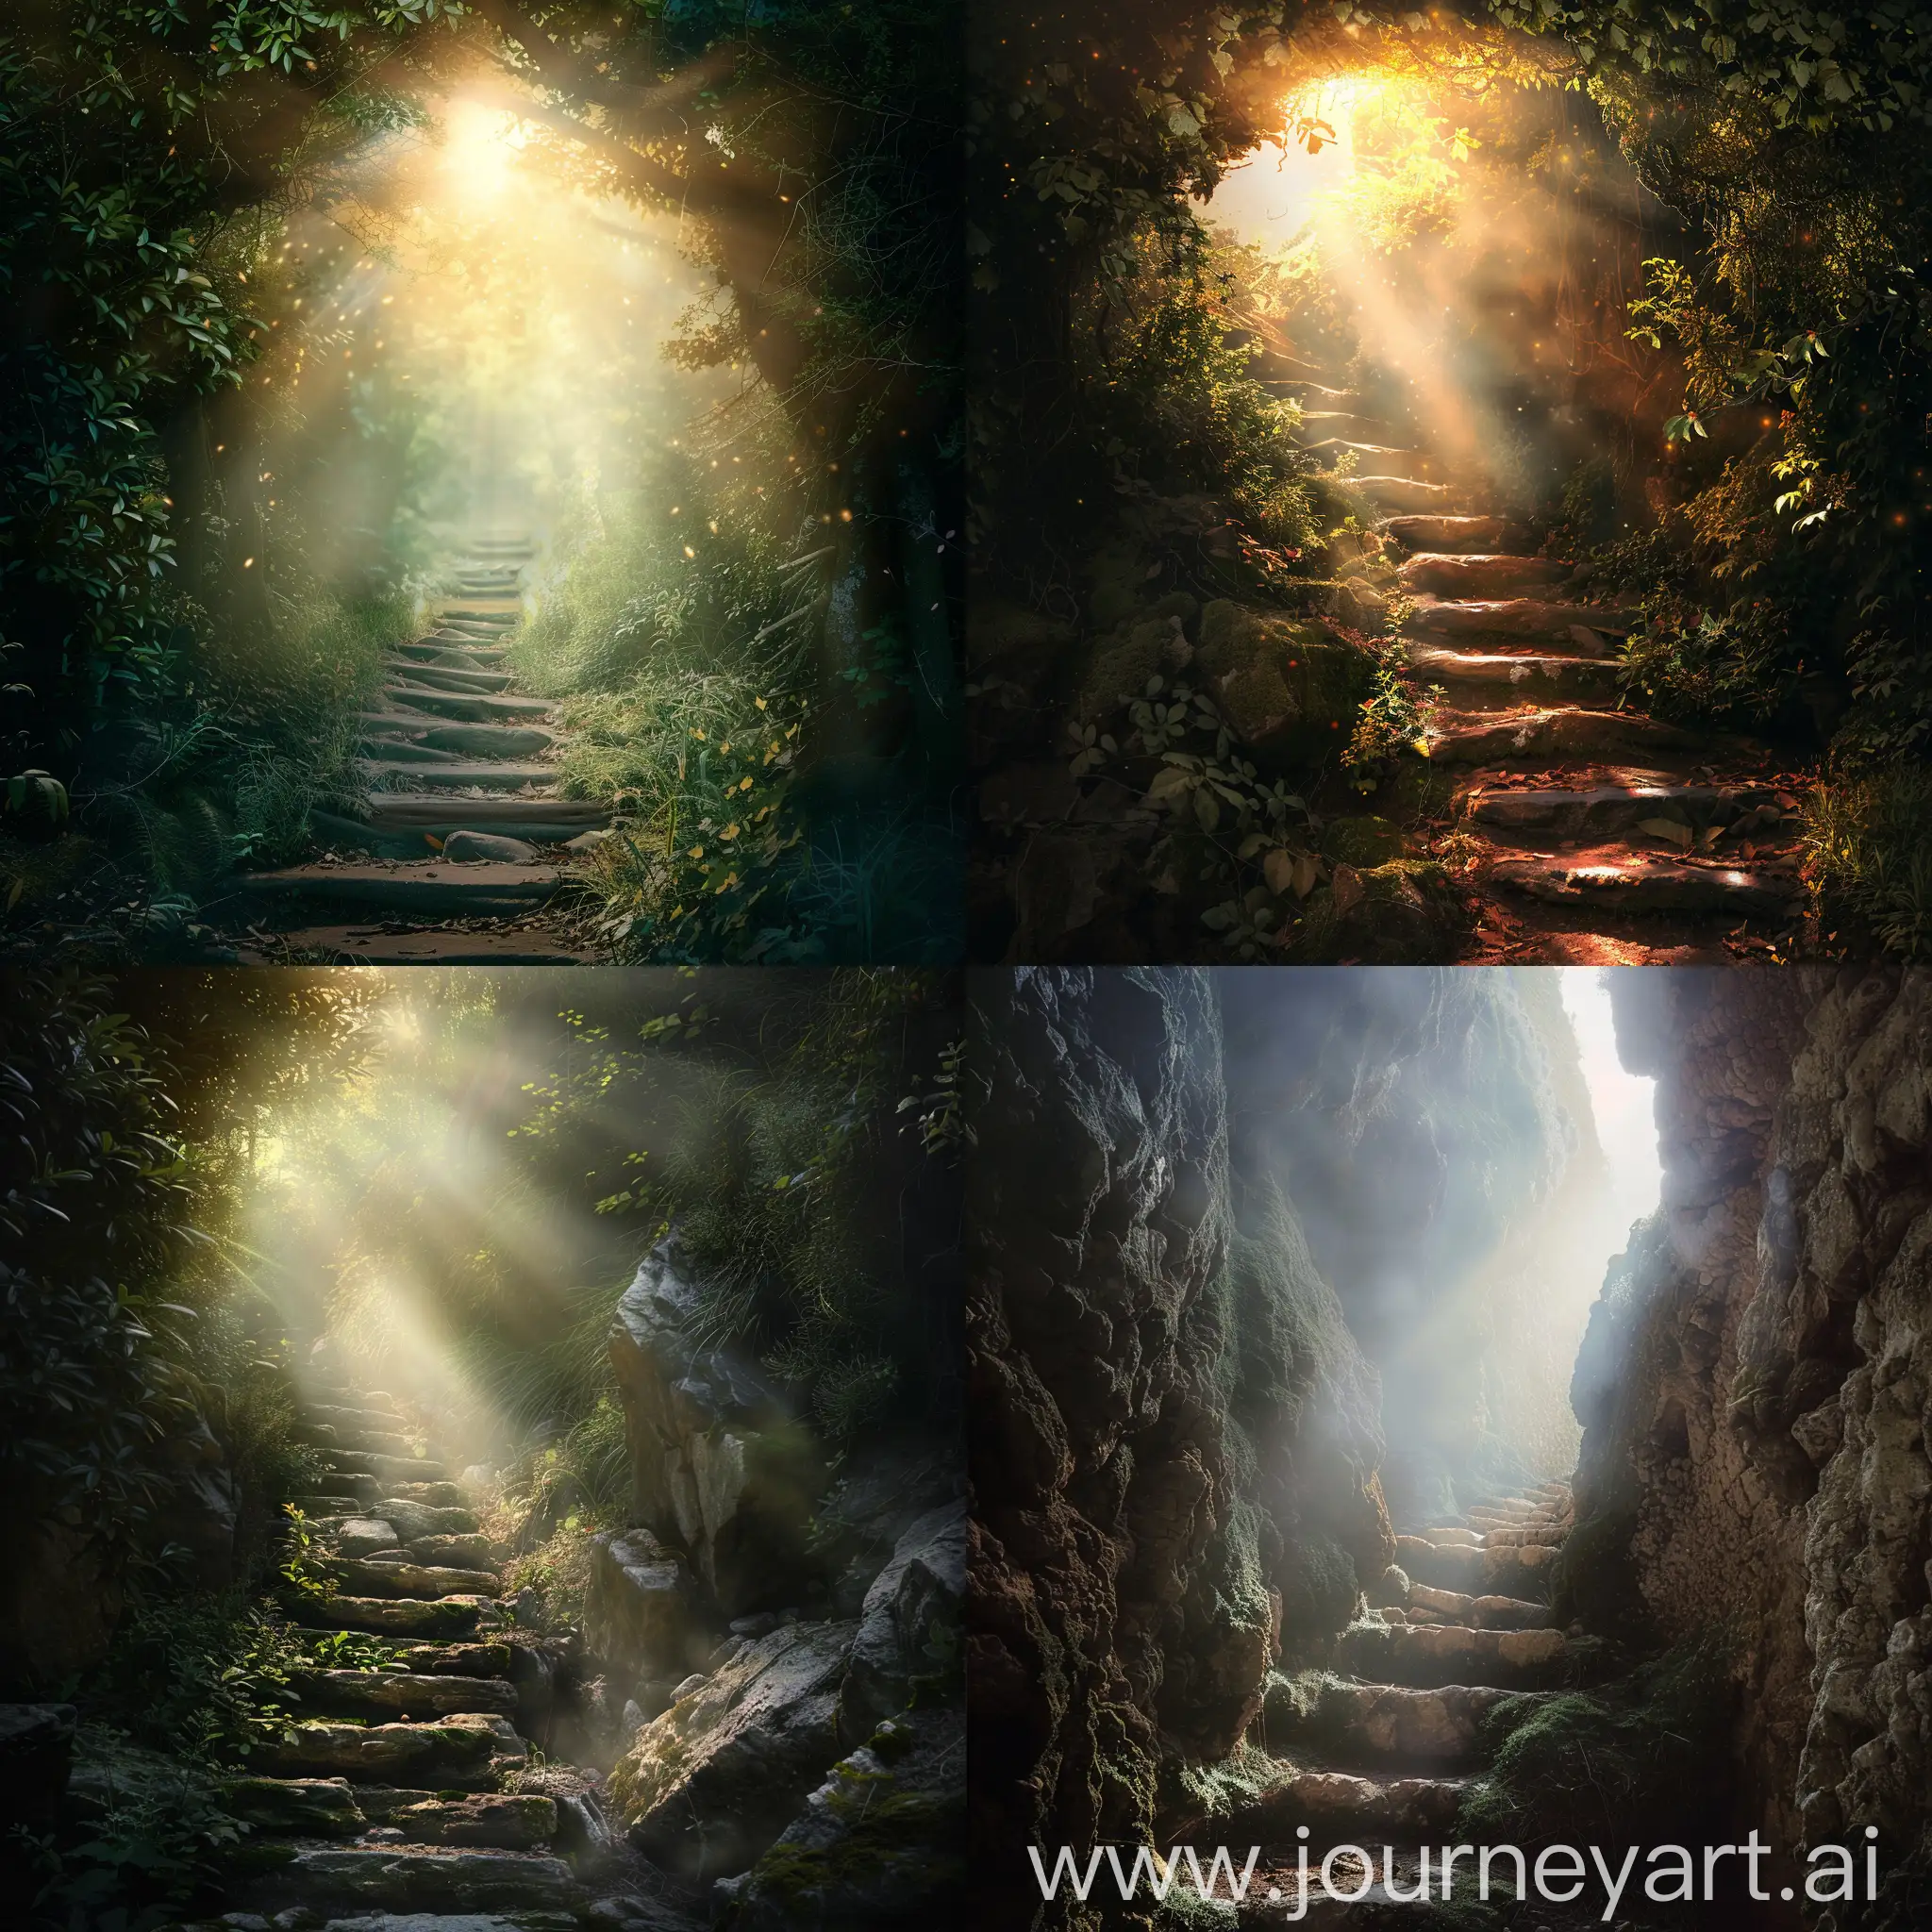 A secret path and light coming from heaven